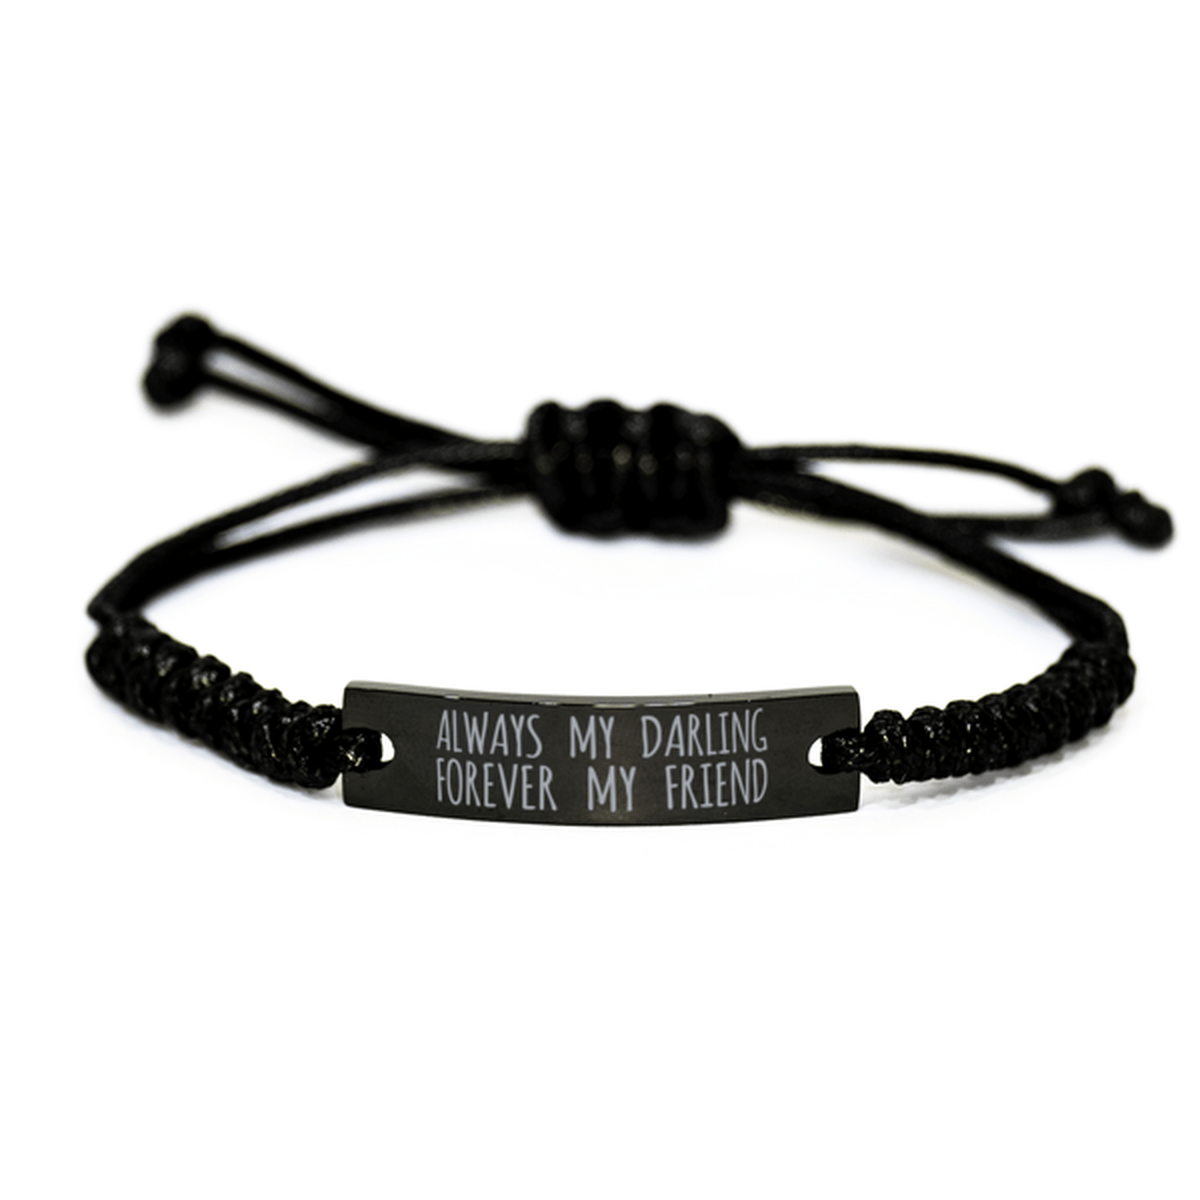 Inspirational Darling Black Rope Bracelet, Always My Darling Forever My Friend, Best Birthday Gifts For Family